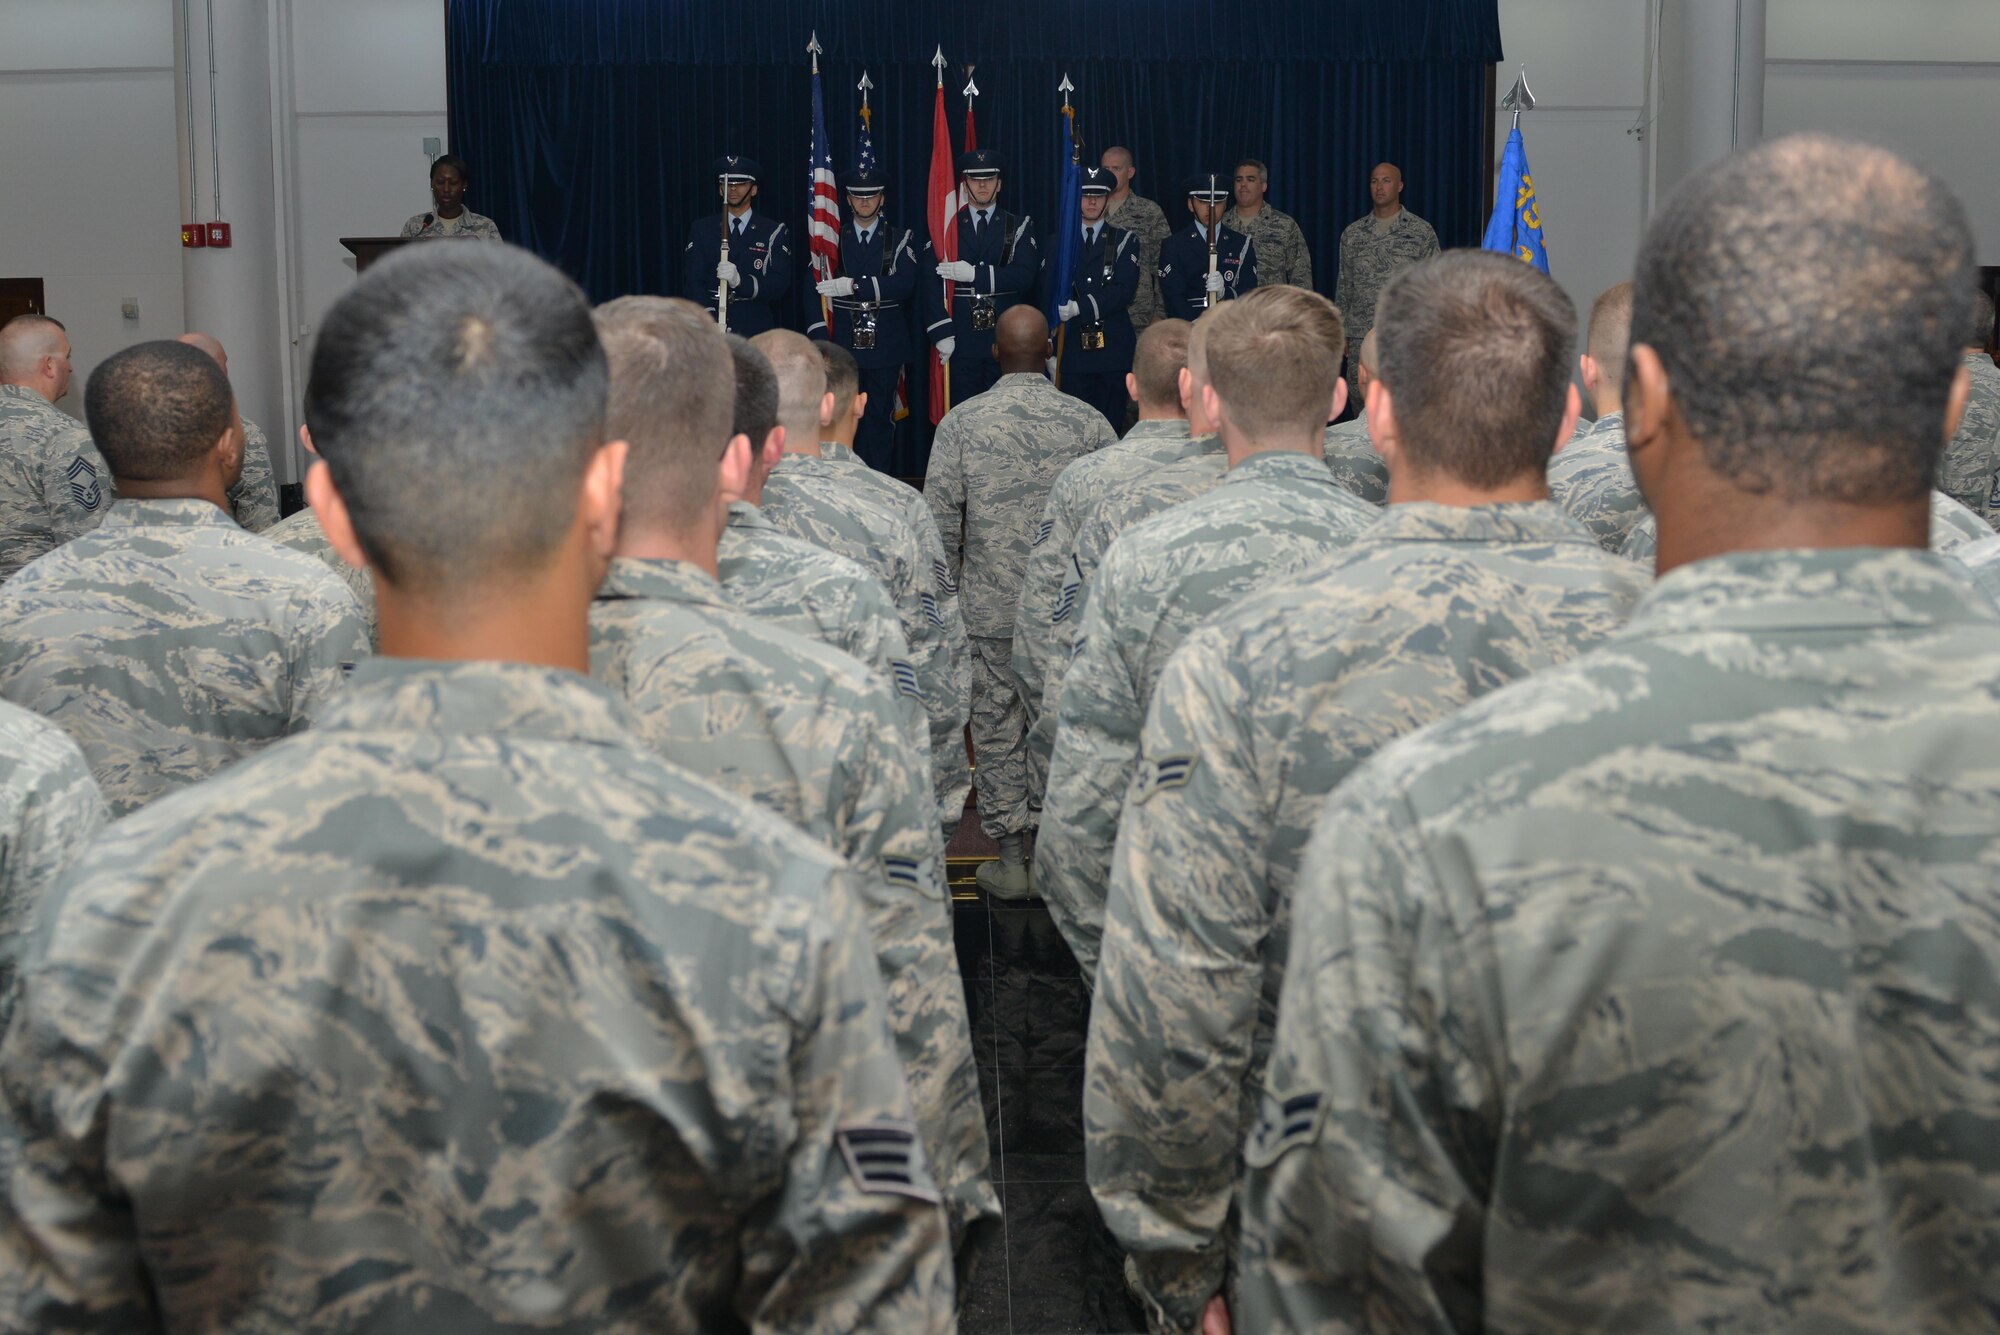 Airmen from the Incirlik Air Base honor guard present the colors at the 39th Communications Squadron change of command ceremony June 14, 2016, at Incirlik AB, Turkey. A change of command ceremony is a tradition that represents a formal transfer of authority and responsibility from the outgoing commander to the incoming commander. (U.S. Air Force photo by Senior Airman John Nieves Camacho/Released)